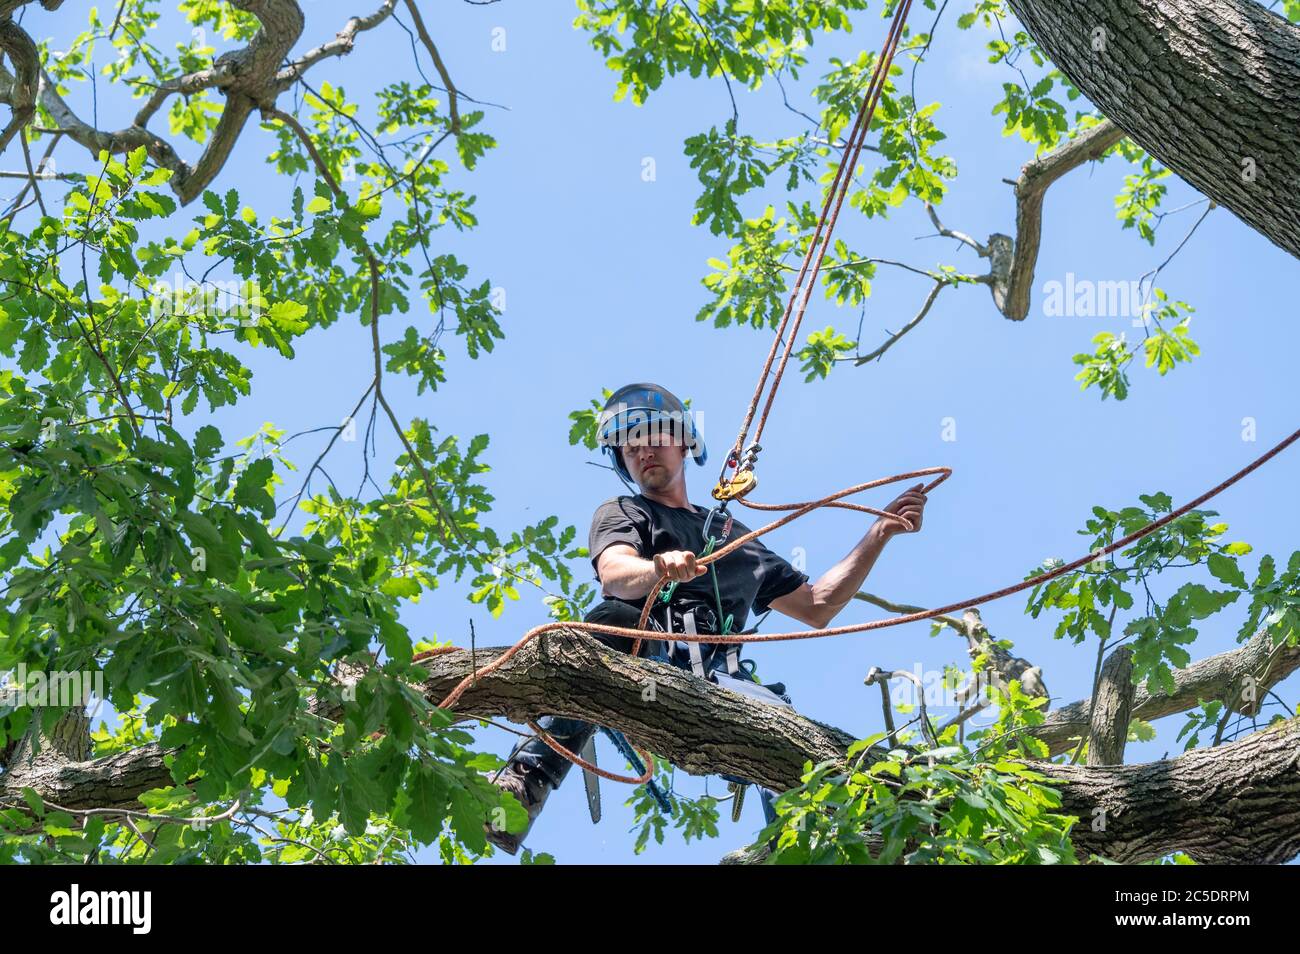 A Tree Surgeon or Arborist adjusts his safety ropes while standing high up a tree. Stock Photo